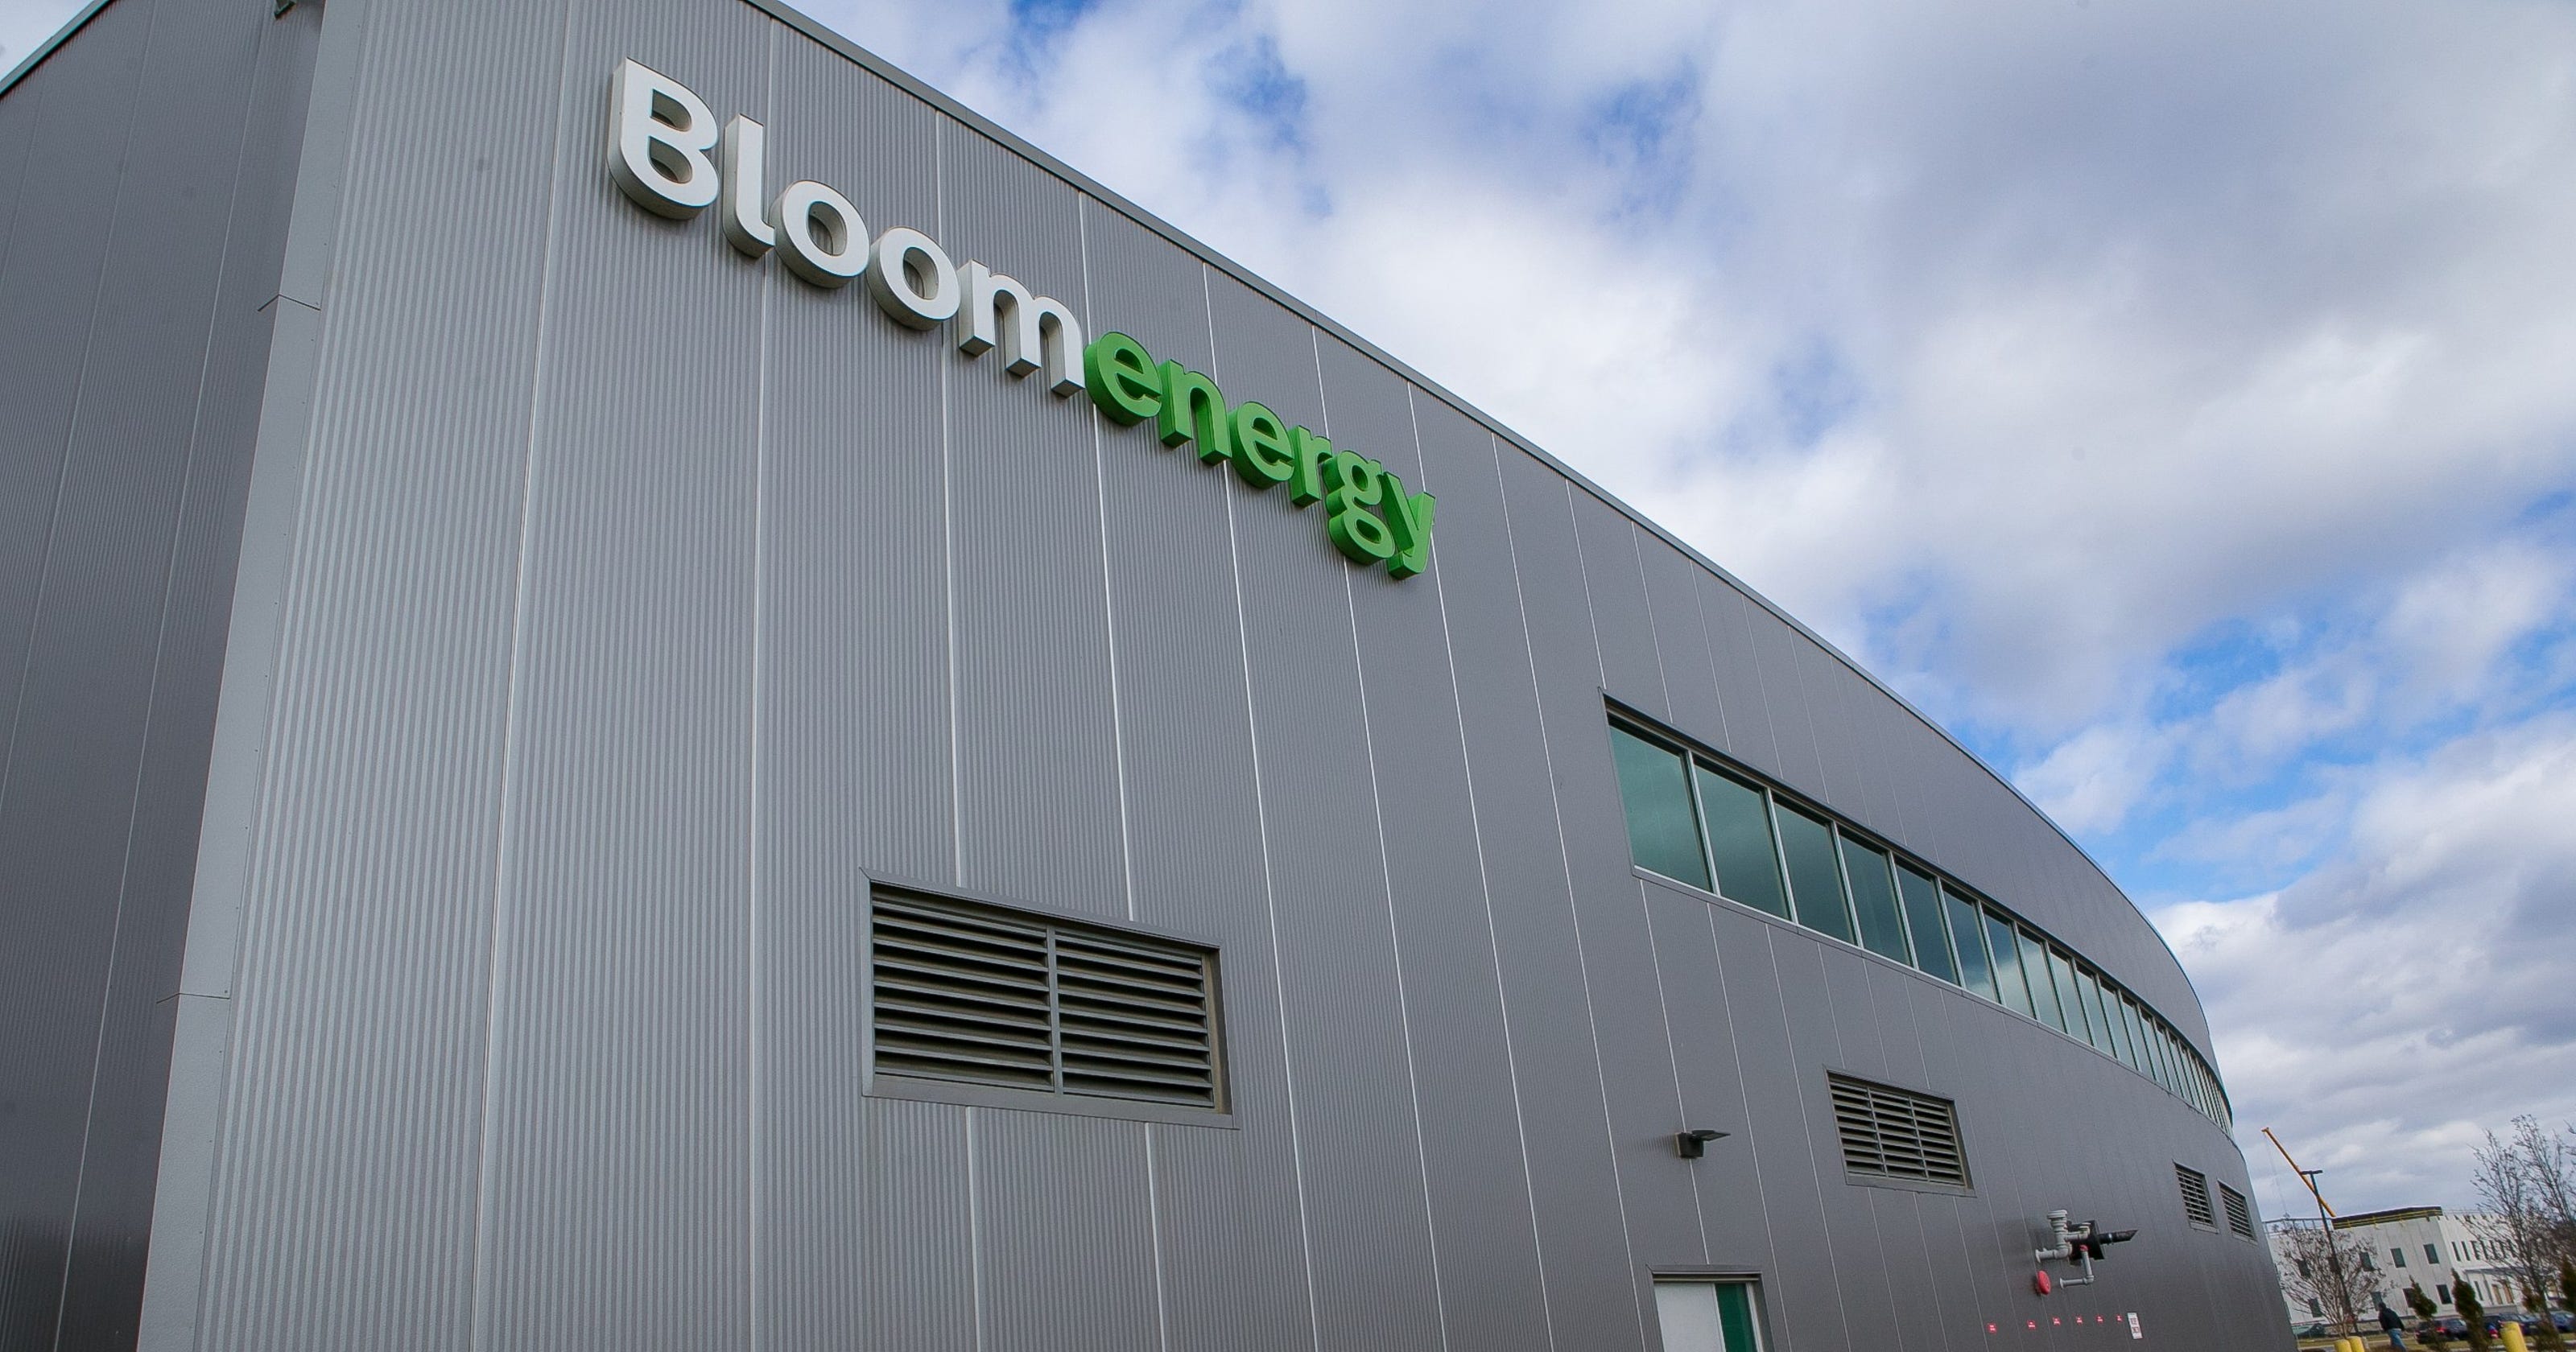 Bloom Energy defends its Delaware deal as state considers a new permit